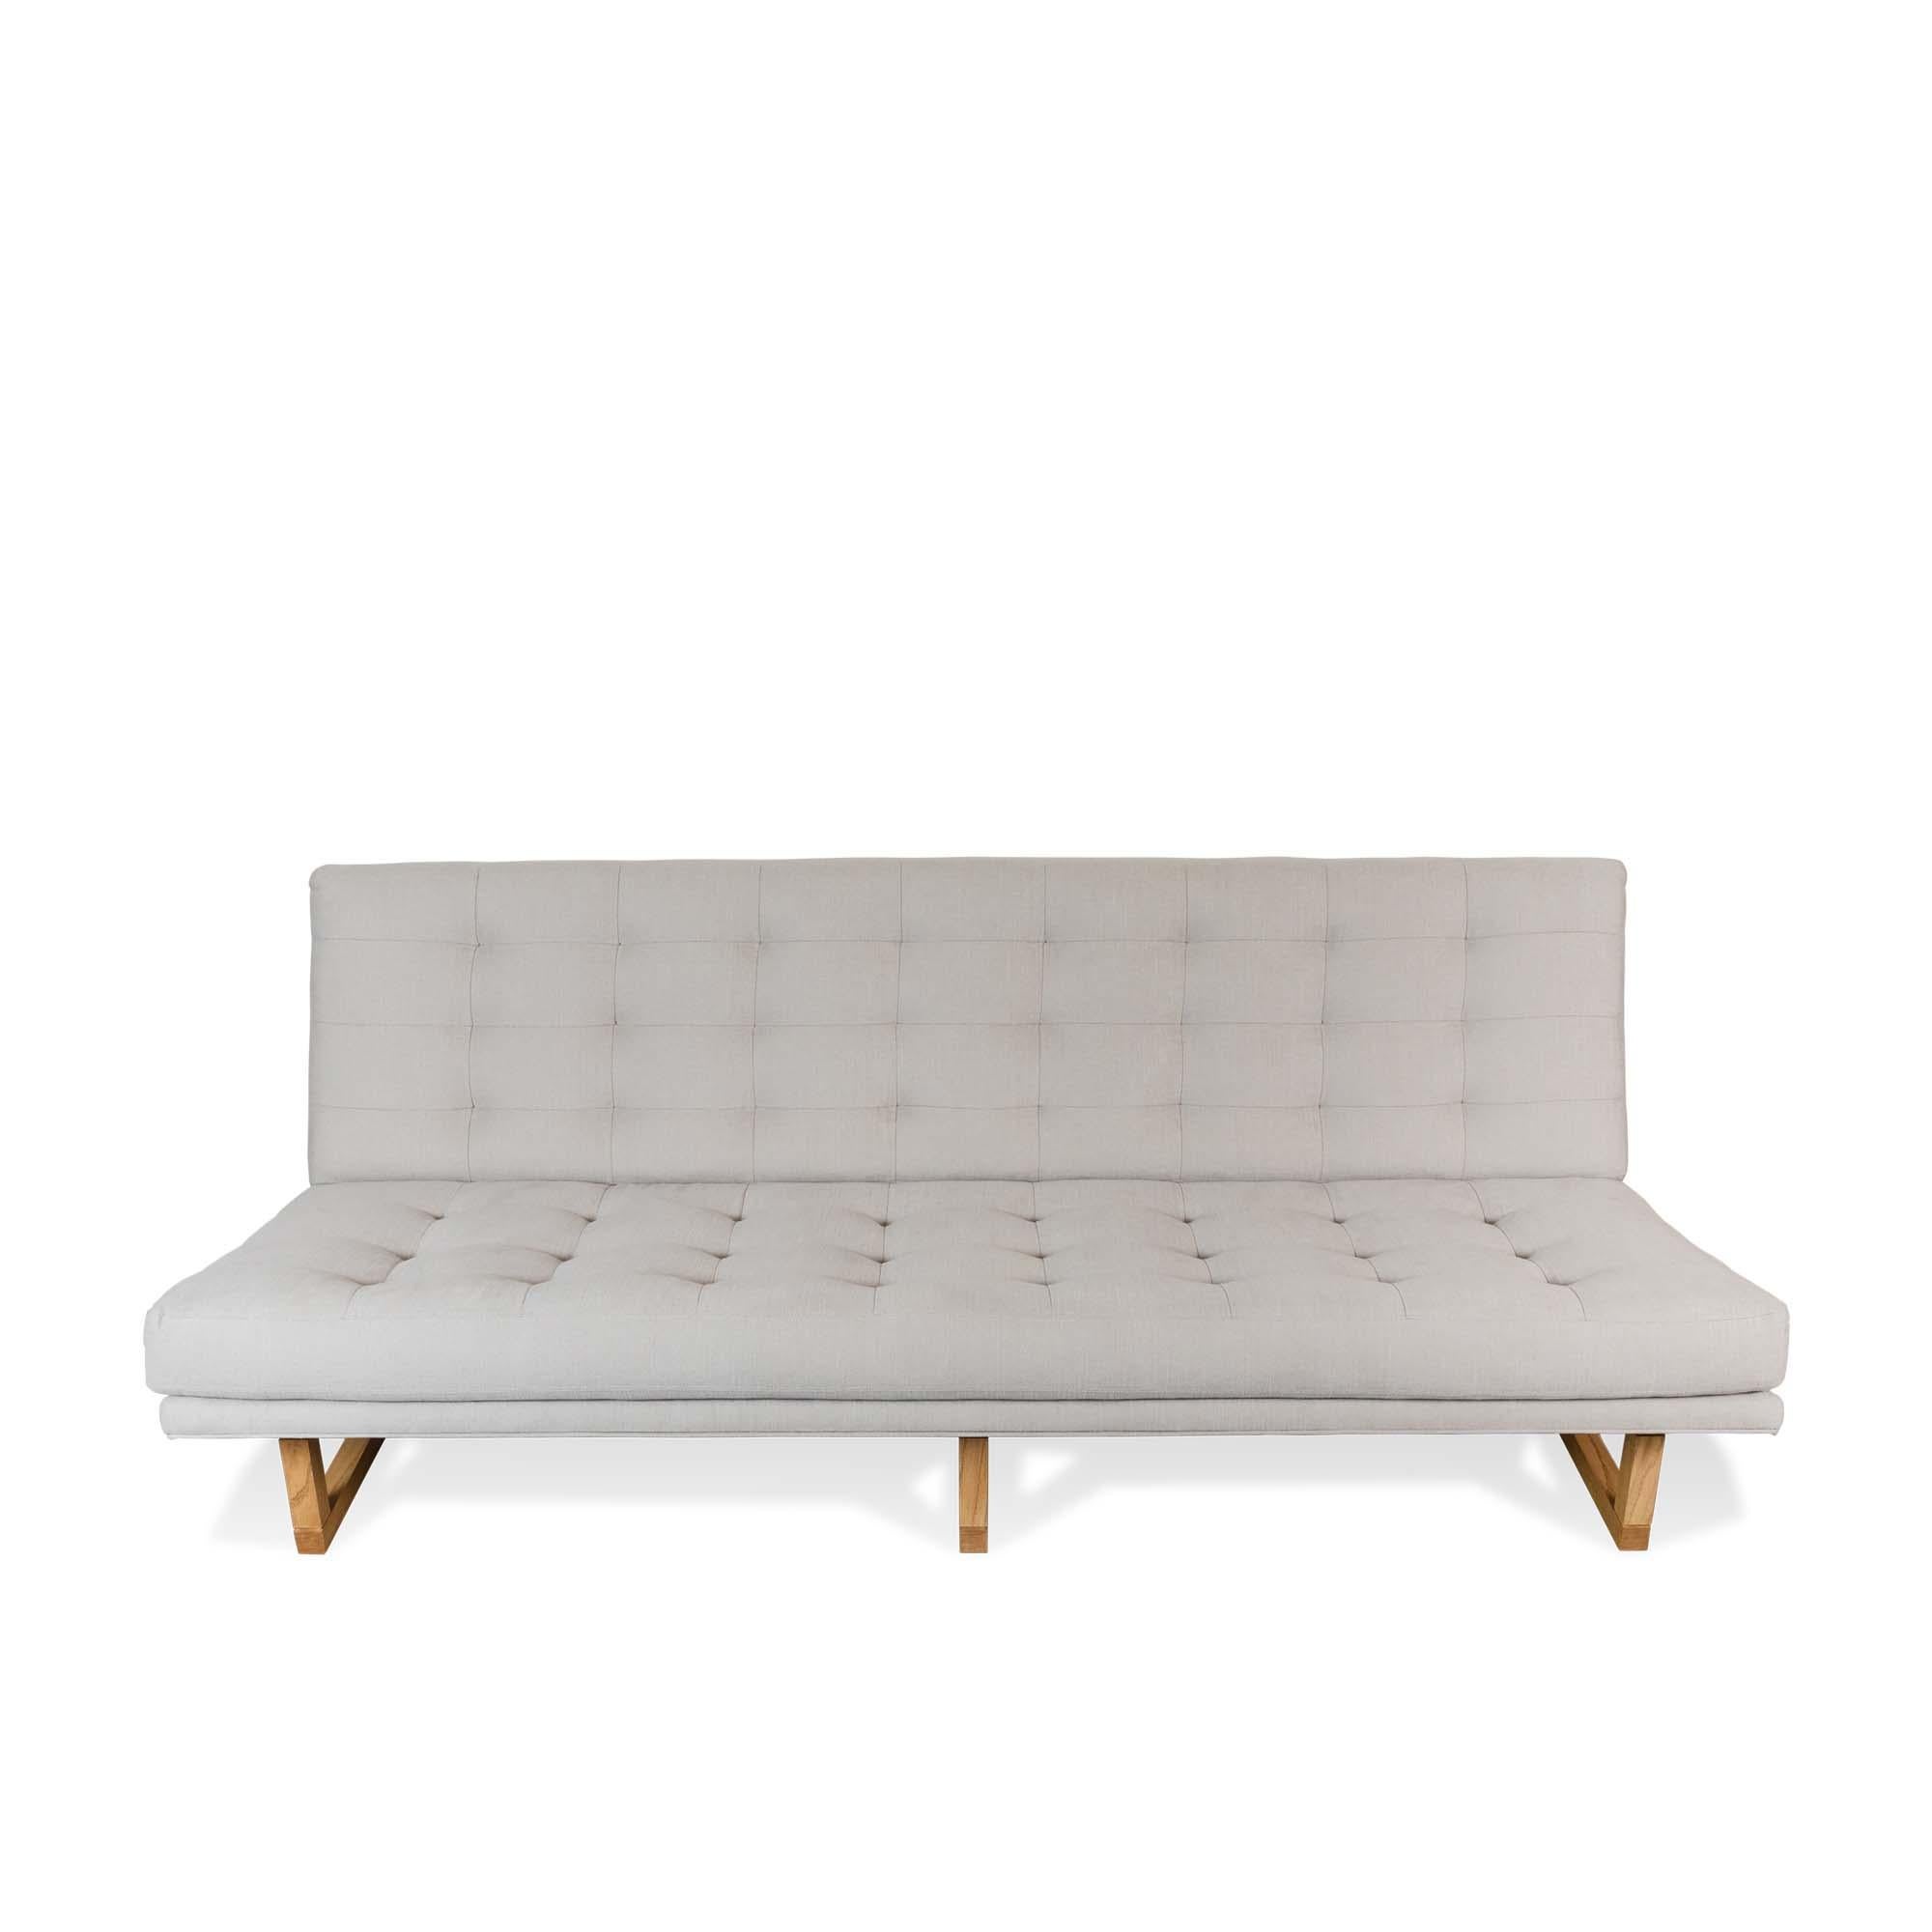 The Griffin sofa is a wide, armless lounge sofa that features biscuit tufting with no buttons. Frame available in American walnut or white oak.

The Lawson-Fenning Collection is designed and handmade in Los Angeles, California.
Reach out to